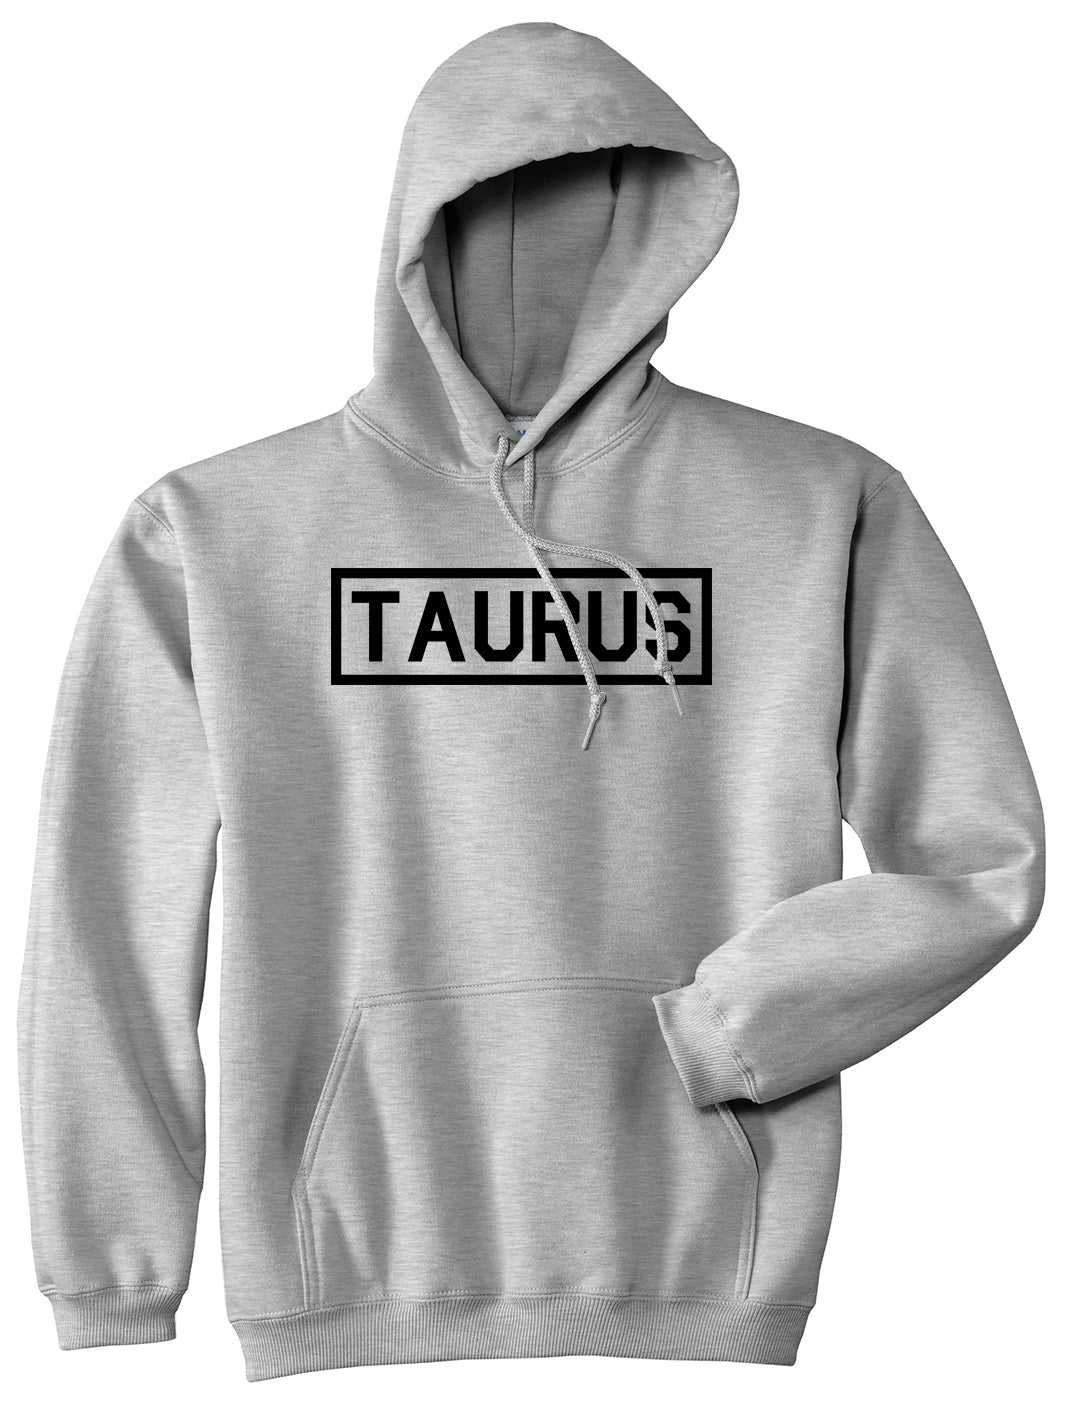 Taurus Horoscope Sign Mens Grey Pullover Hoodie by KINGS OF NY